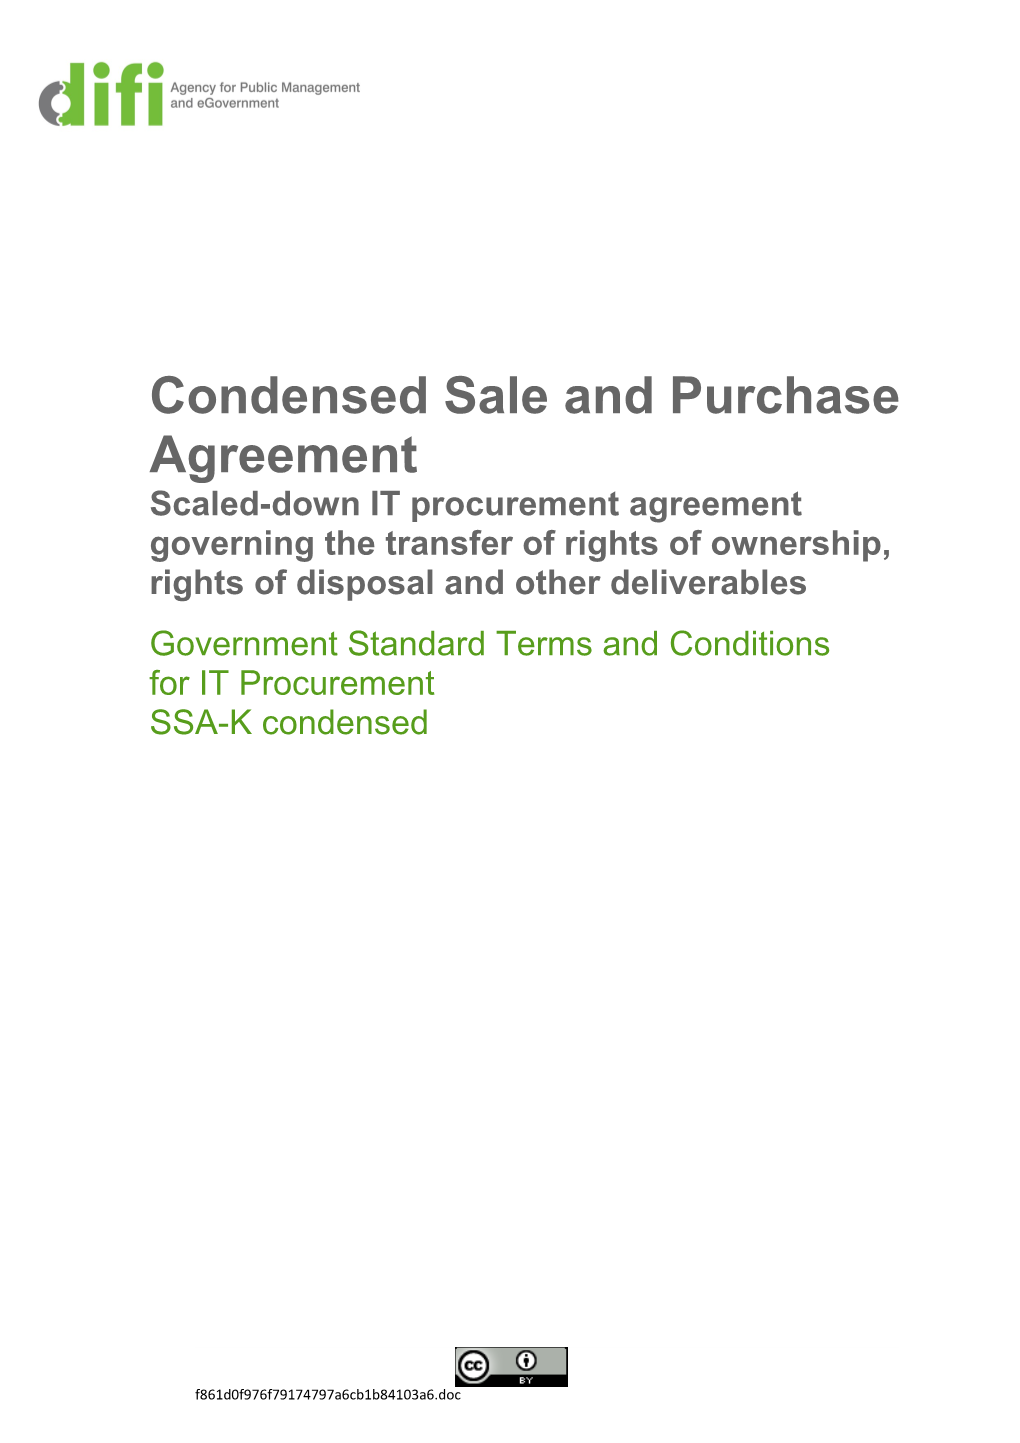 Condensed Sale and Purchase Agreement